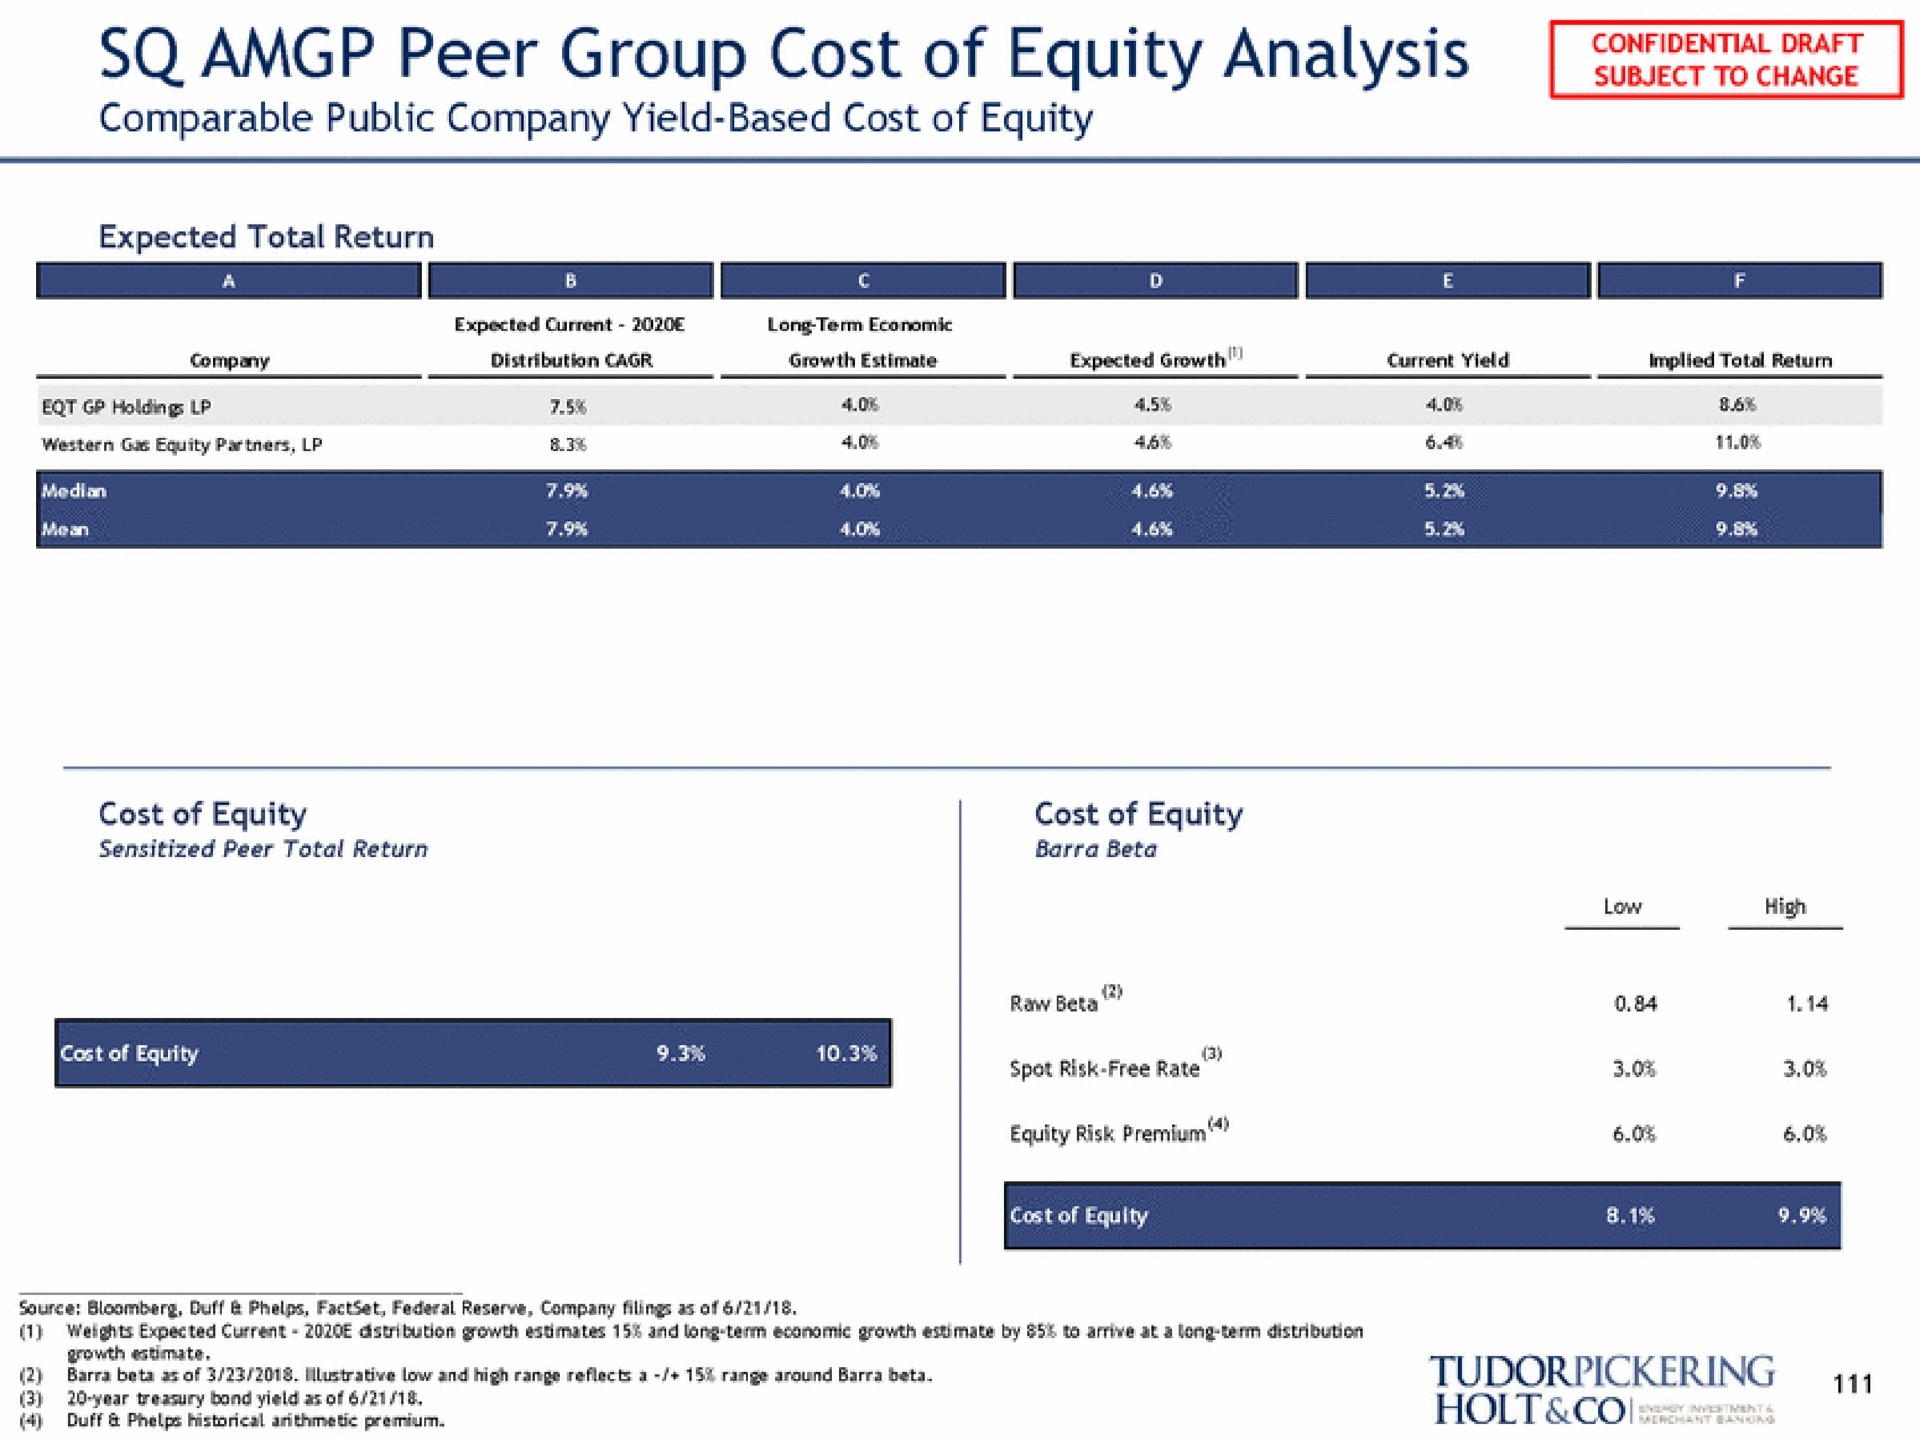 peer group cost of equity analysis subject to change a a a | Tudor, Pickering, Holt & Co